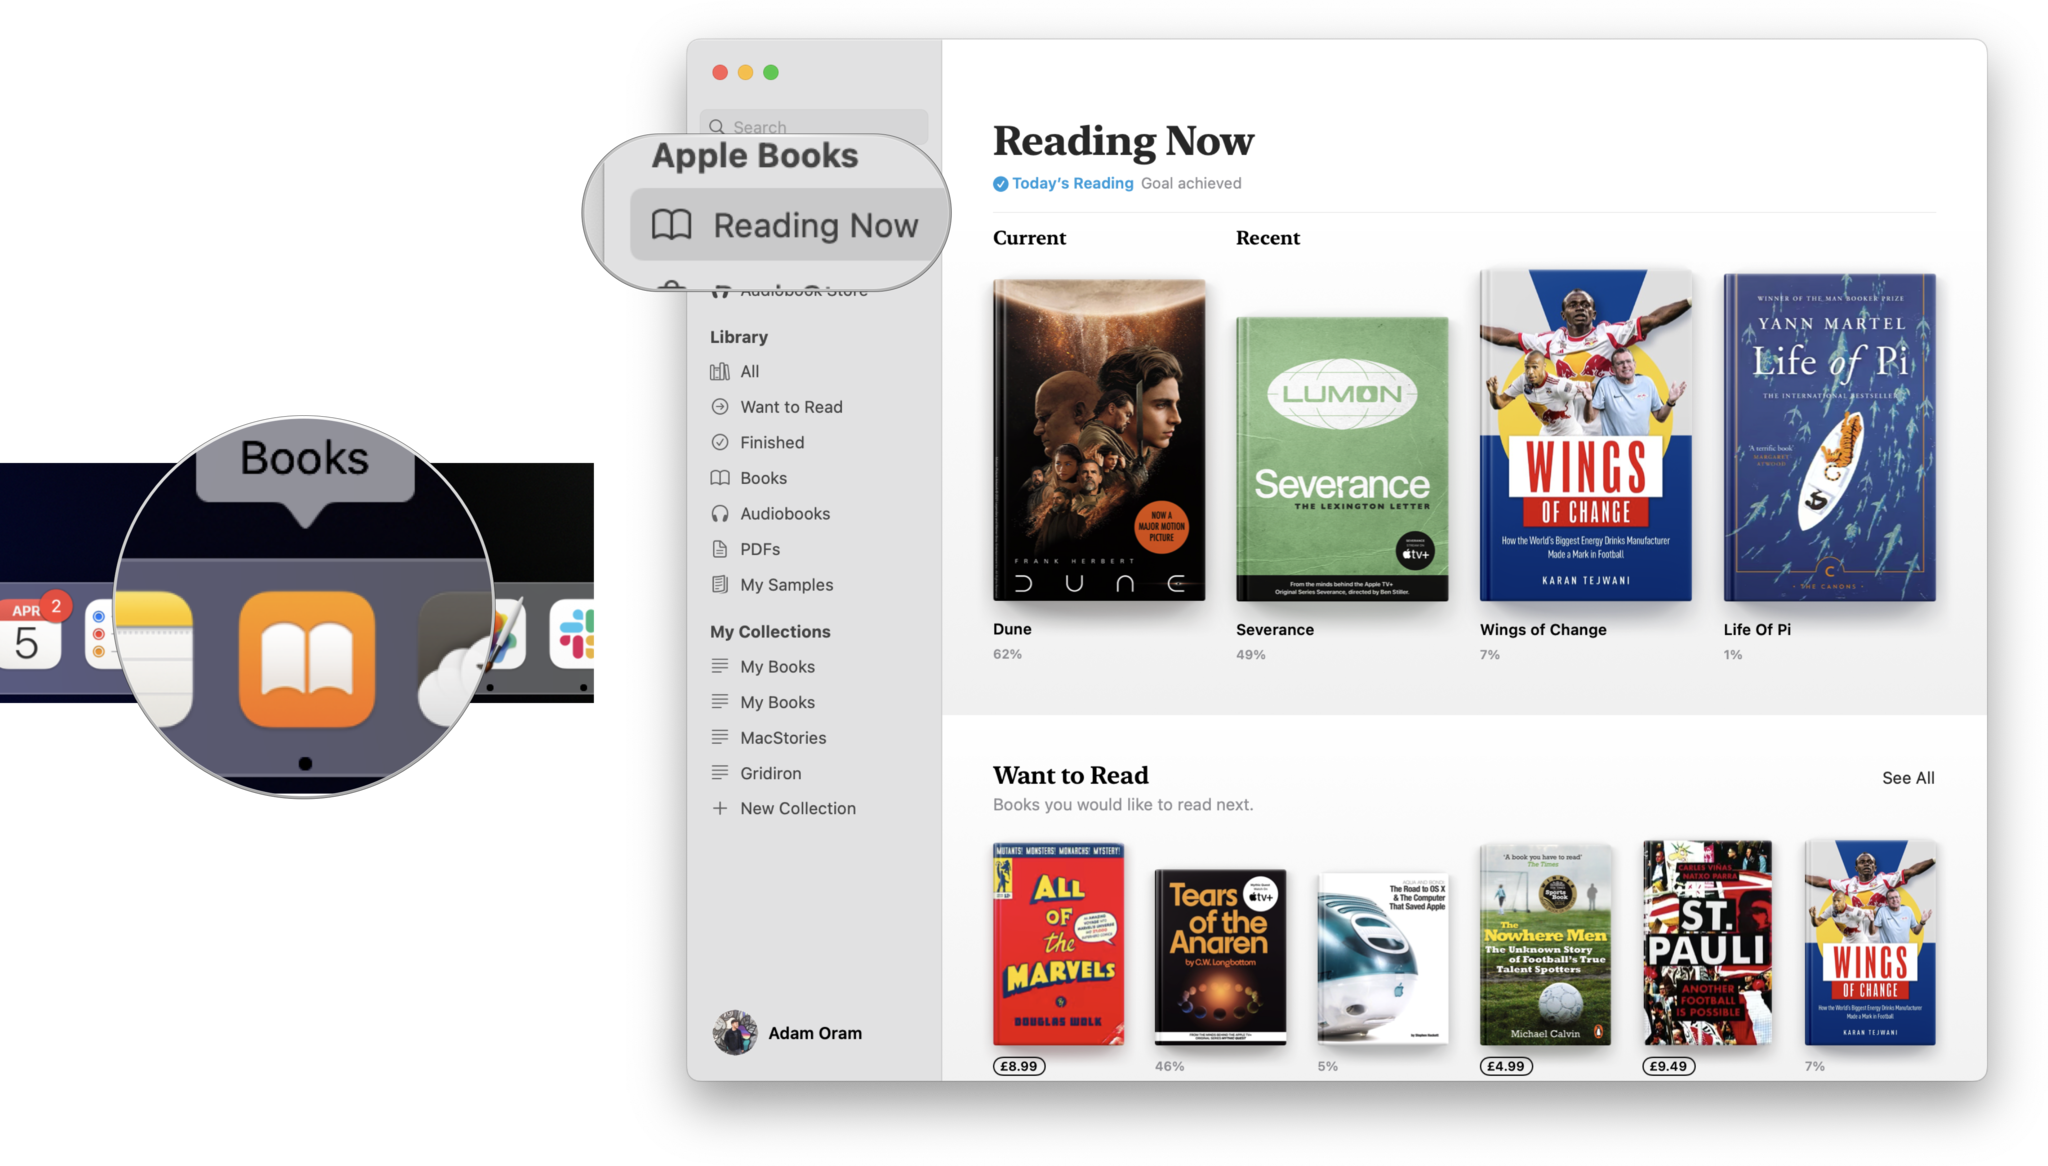 How to set reading goals in Apple Books on Mac: Open Books, click on the Reading Now tab, click on Today's Reading or scroll down